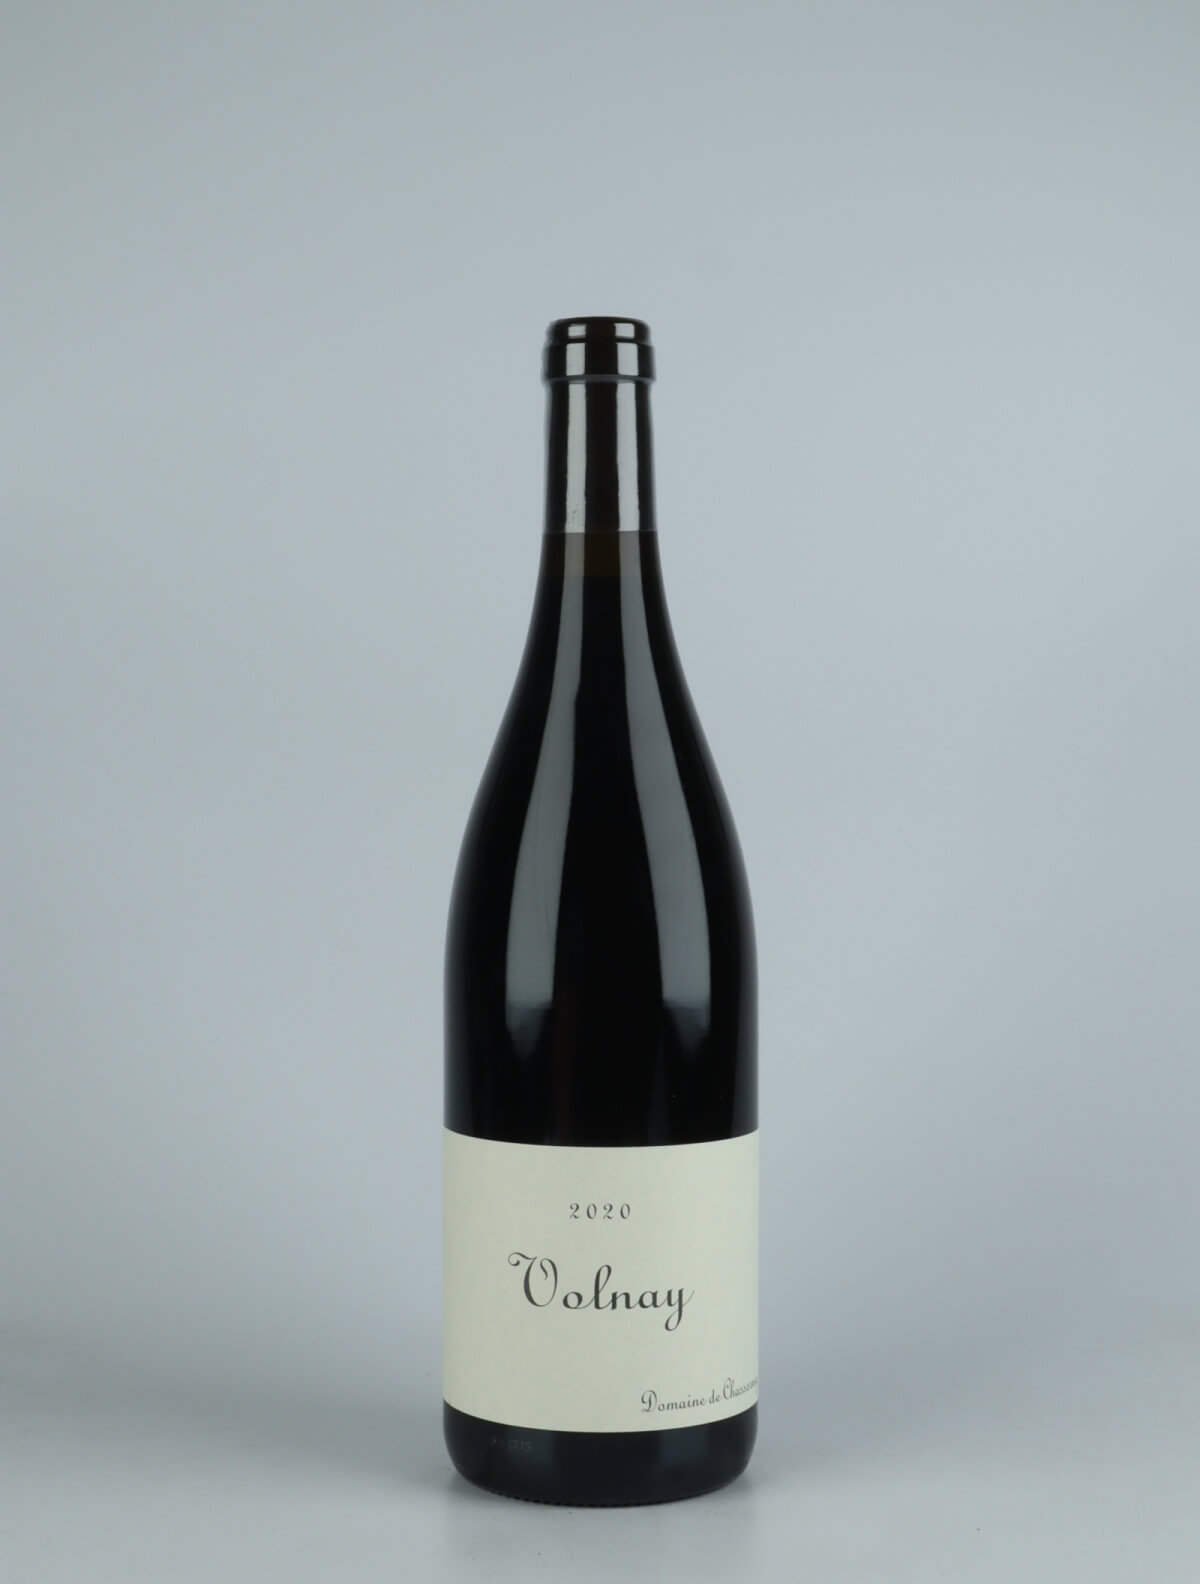 A bottle 2020 Volnay Red wine from Domaine de Chassorney, Burgundy in France